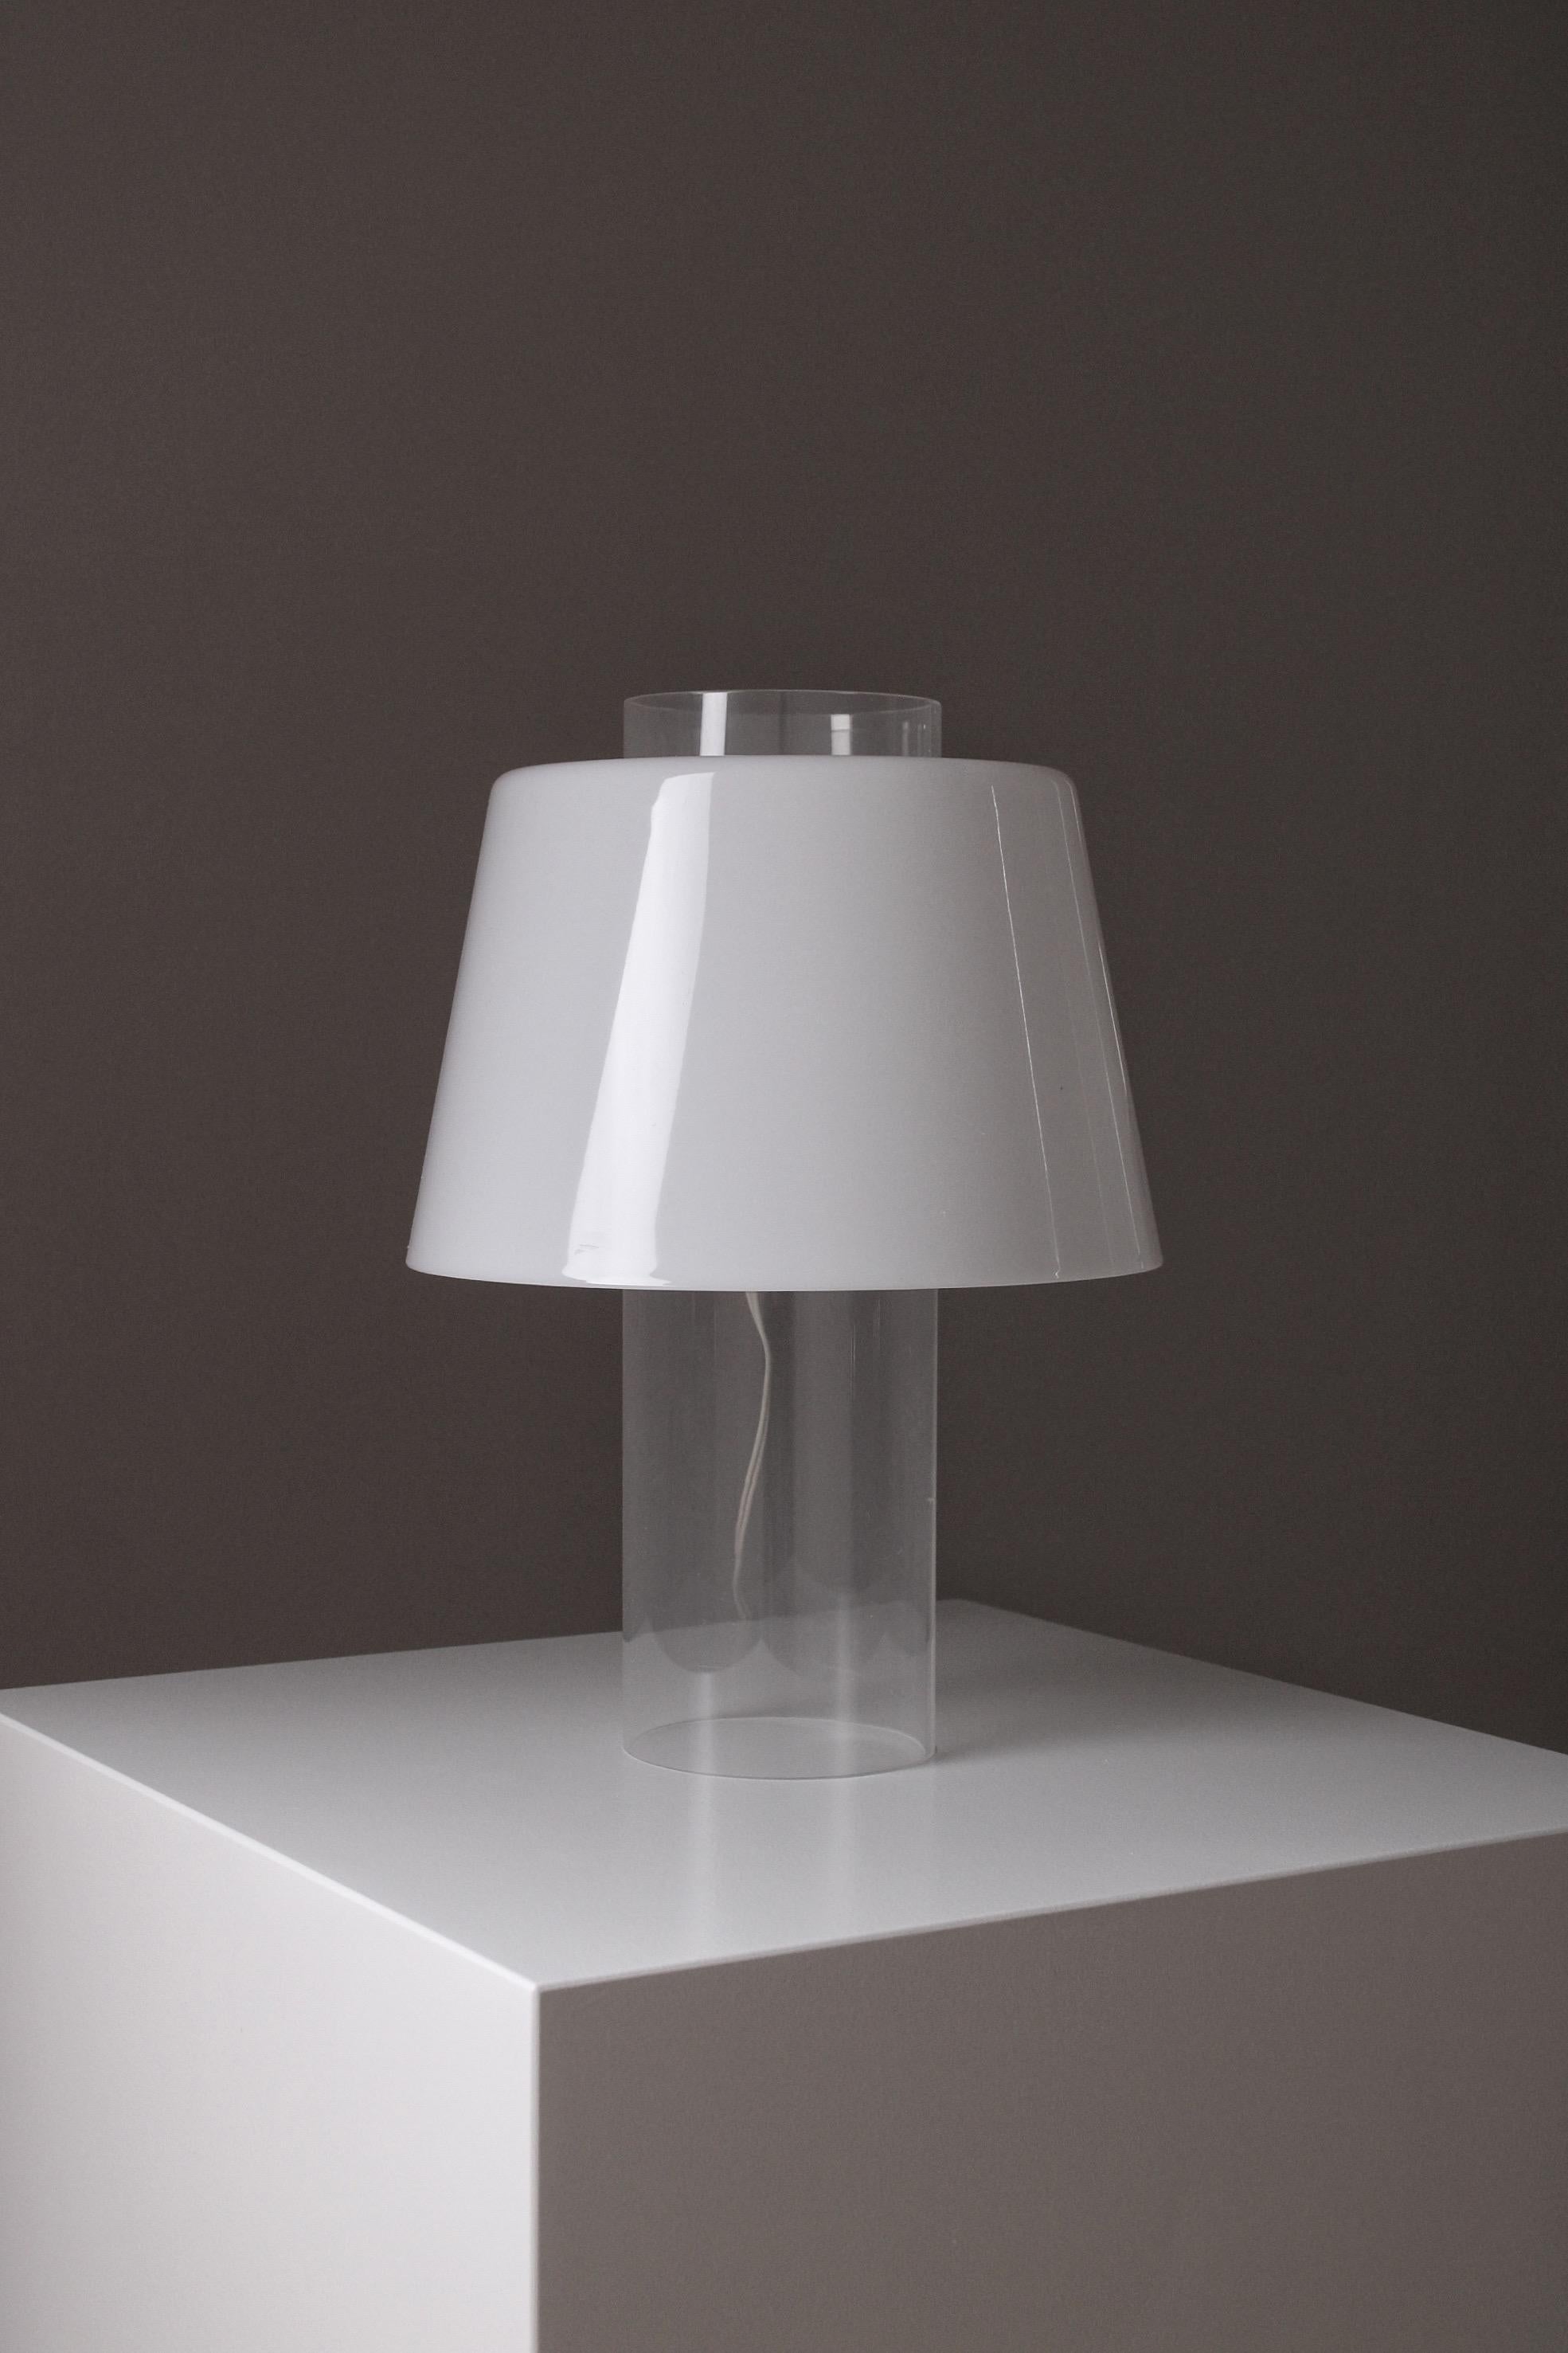 Early Modern Art table lamp, designed by Yki Nummi in 1955. Produced by Stockmann-Orno in Finland. Stockmann-Orno was one of the first manufacturers to experiment with methacrylate. This model is, among others, one of the first lamps fully created